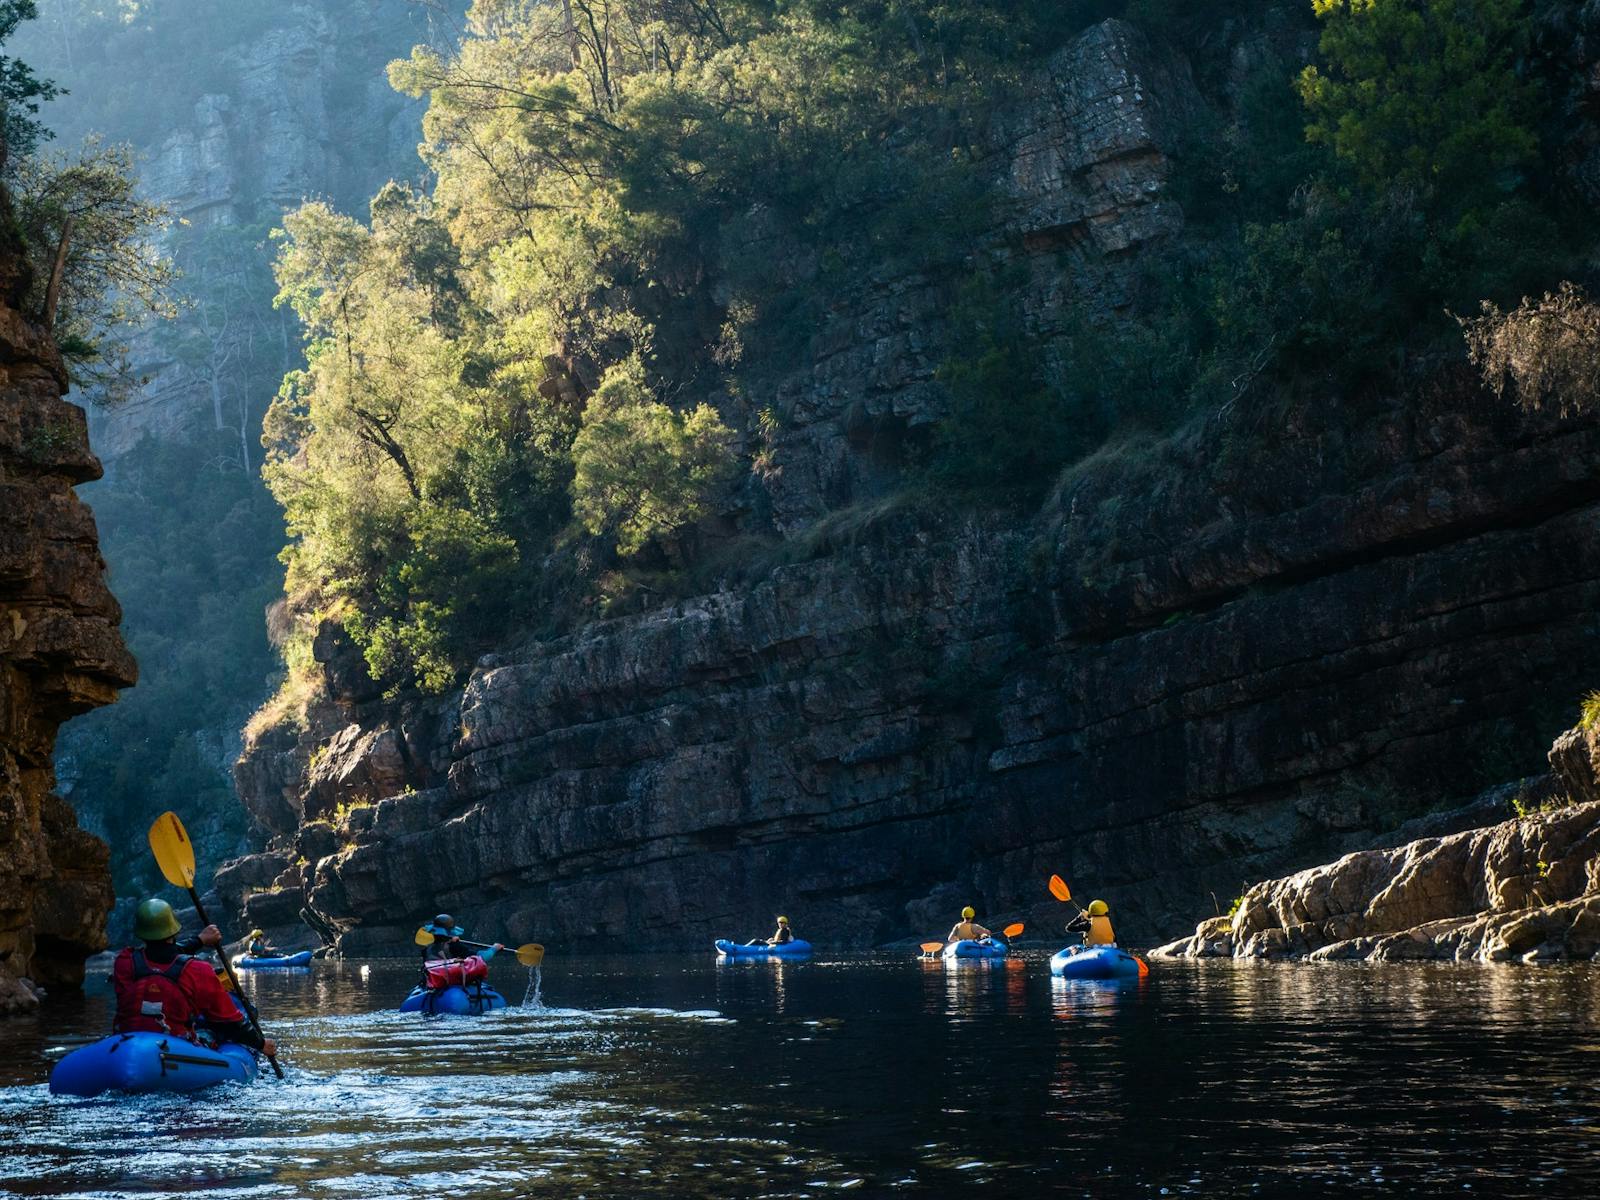 Packrafters paddle through a gorge with morning sun in the trees